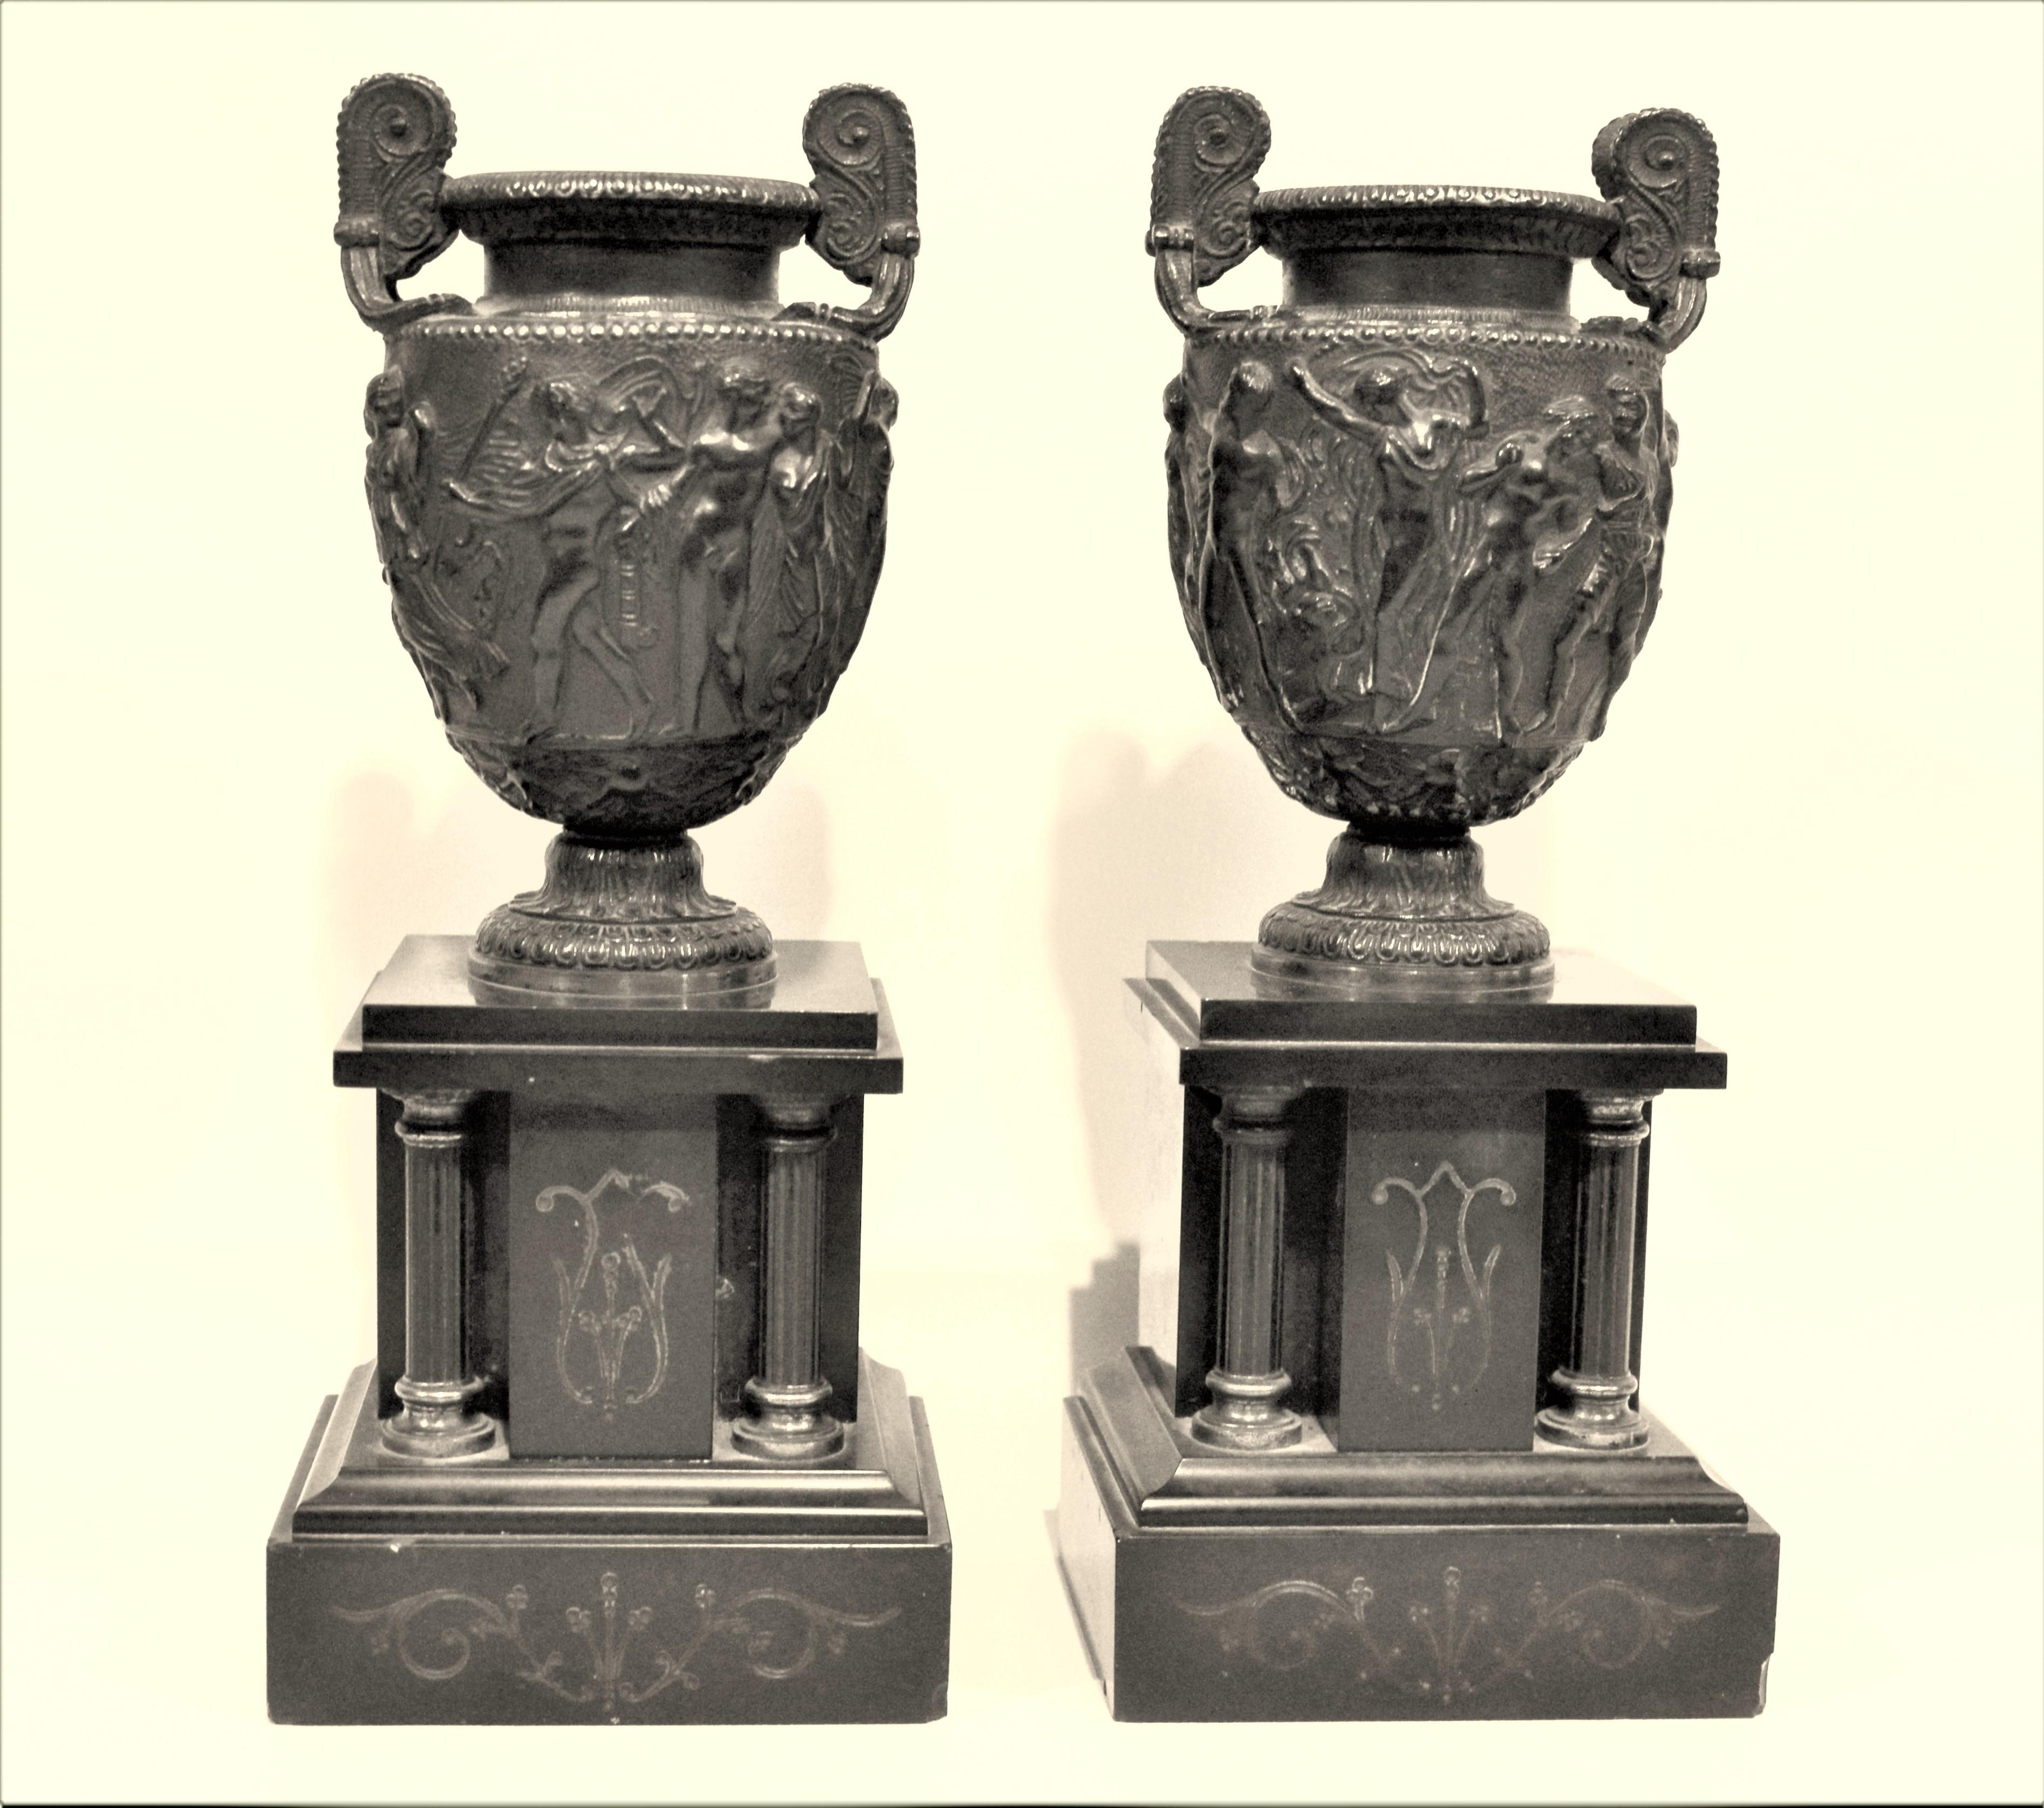 Pair of matching antique garnitures done with cast bronze urns with intricately cast neoclassical decoration in high relief presented on polished black slate pedestal bases with etched decoration.